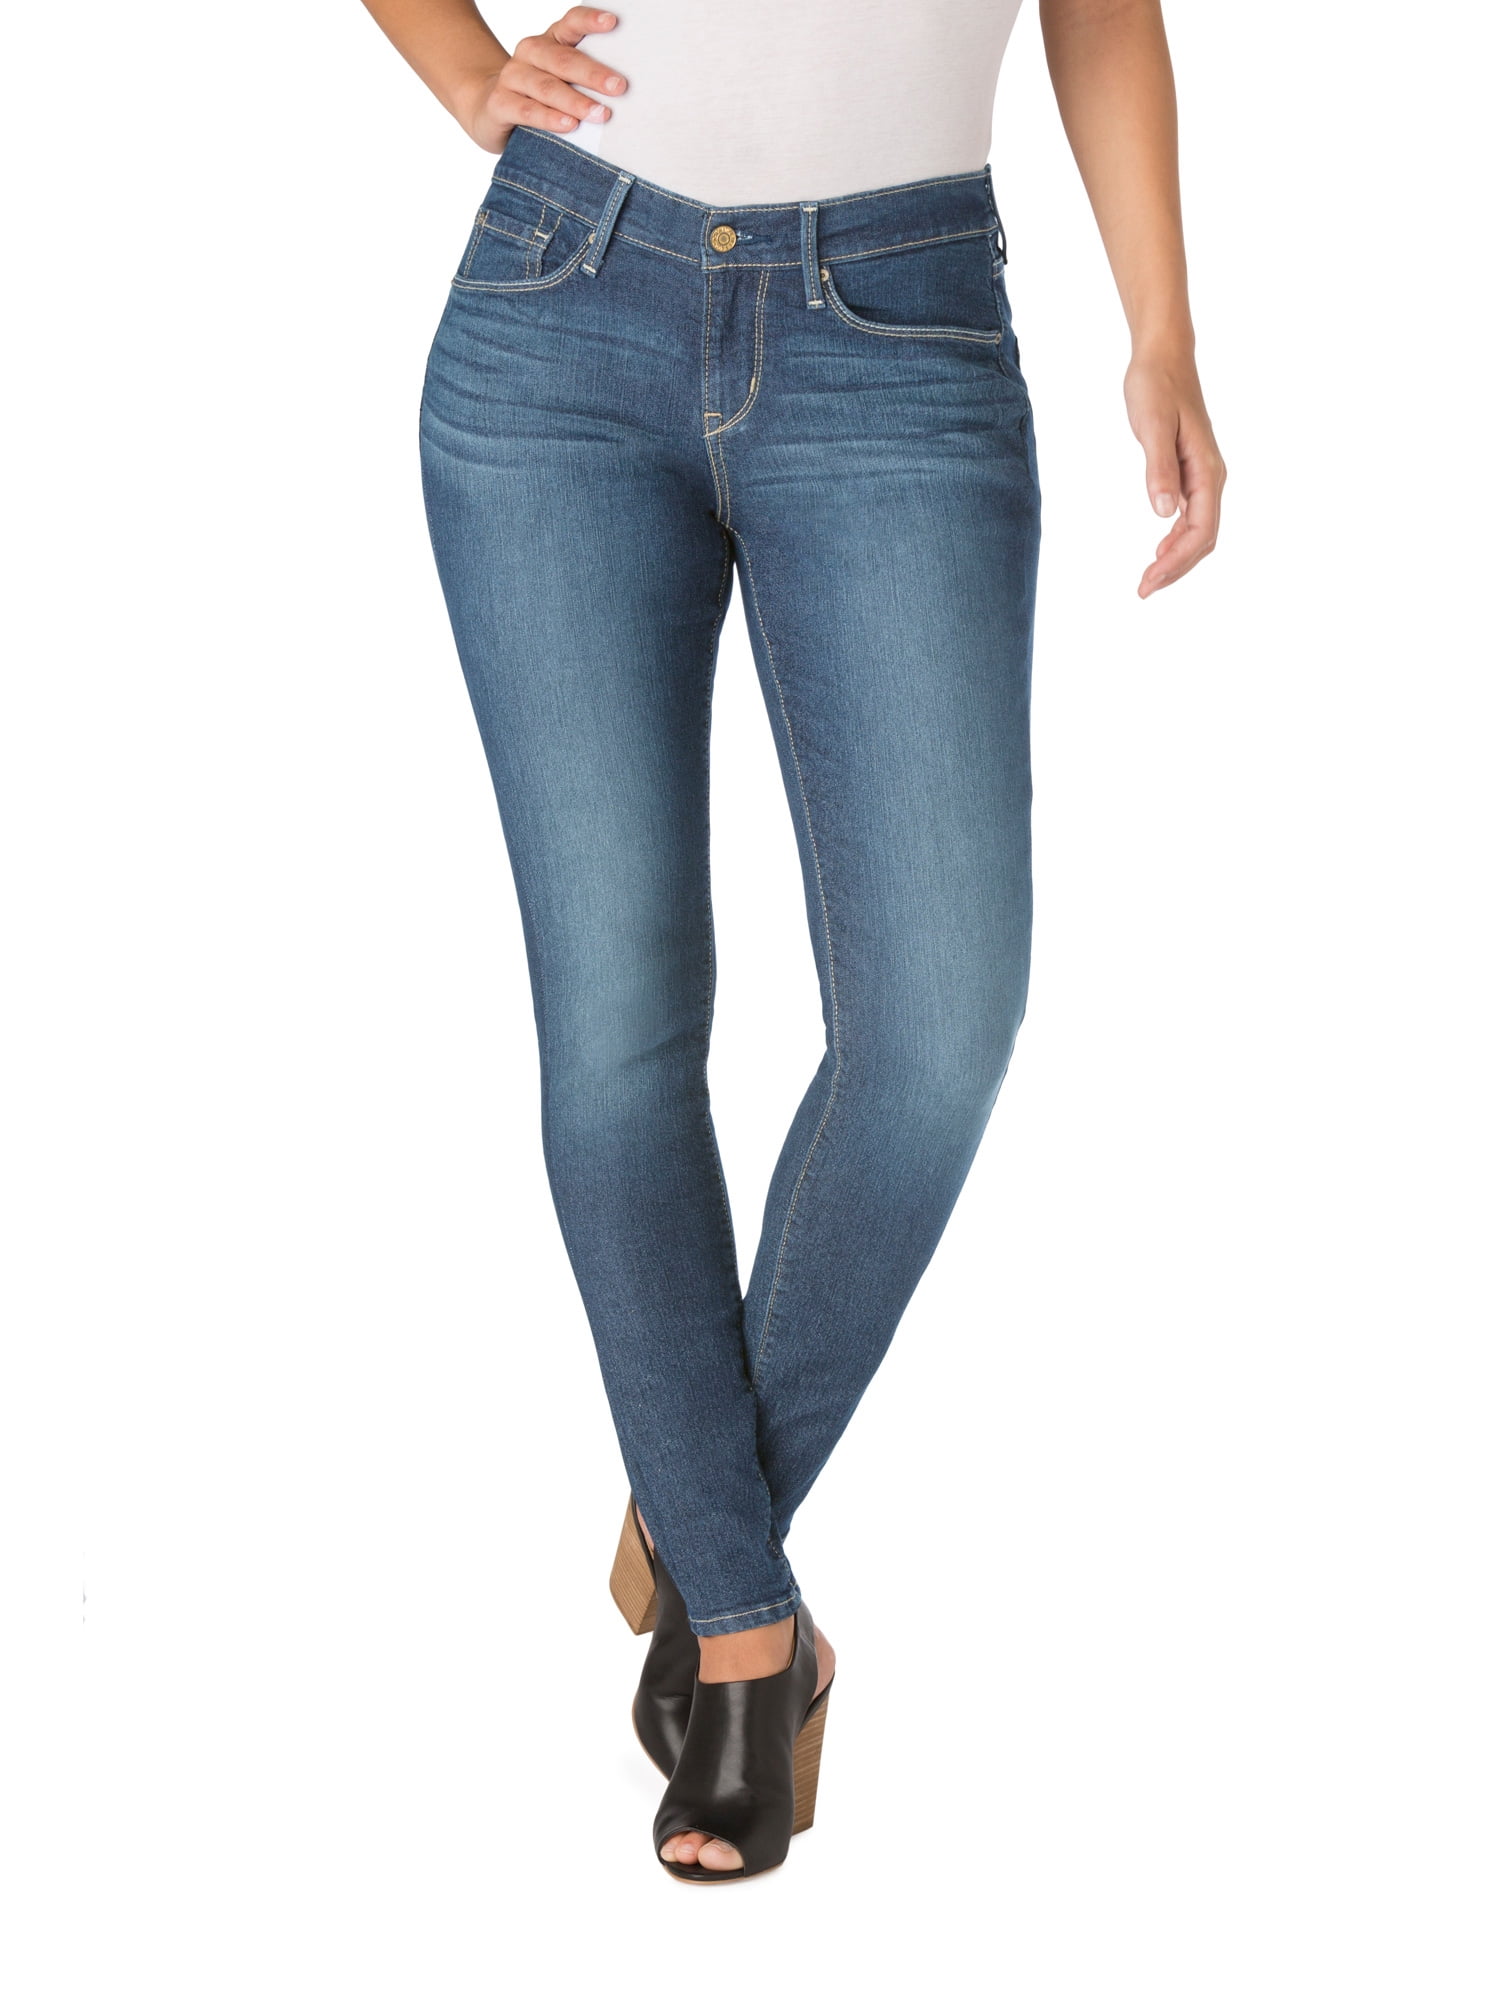 Signature by Levi Strauss & Co. Women's Curvy Skinny Jeans 